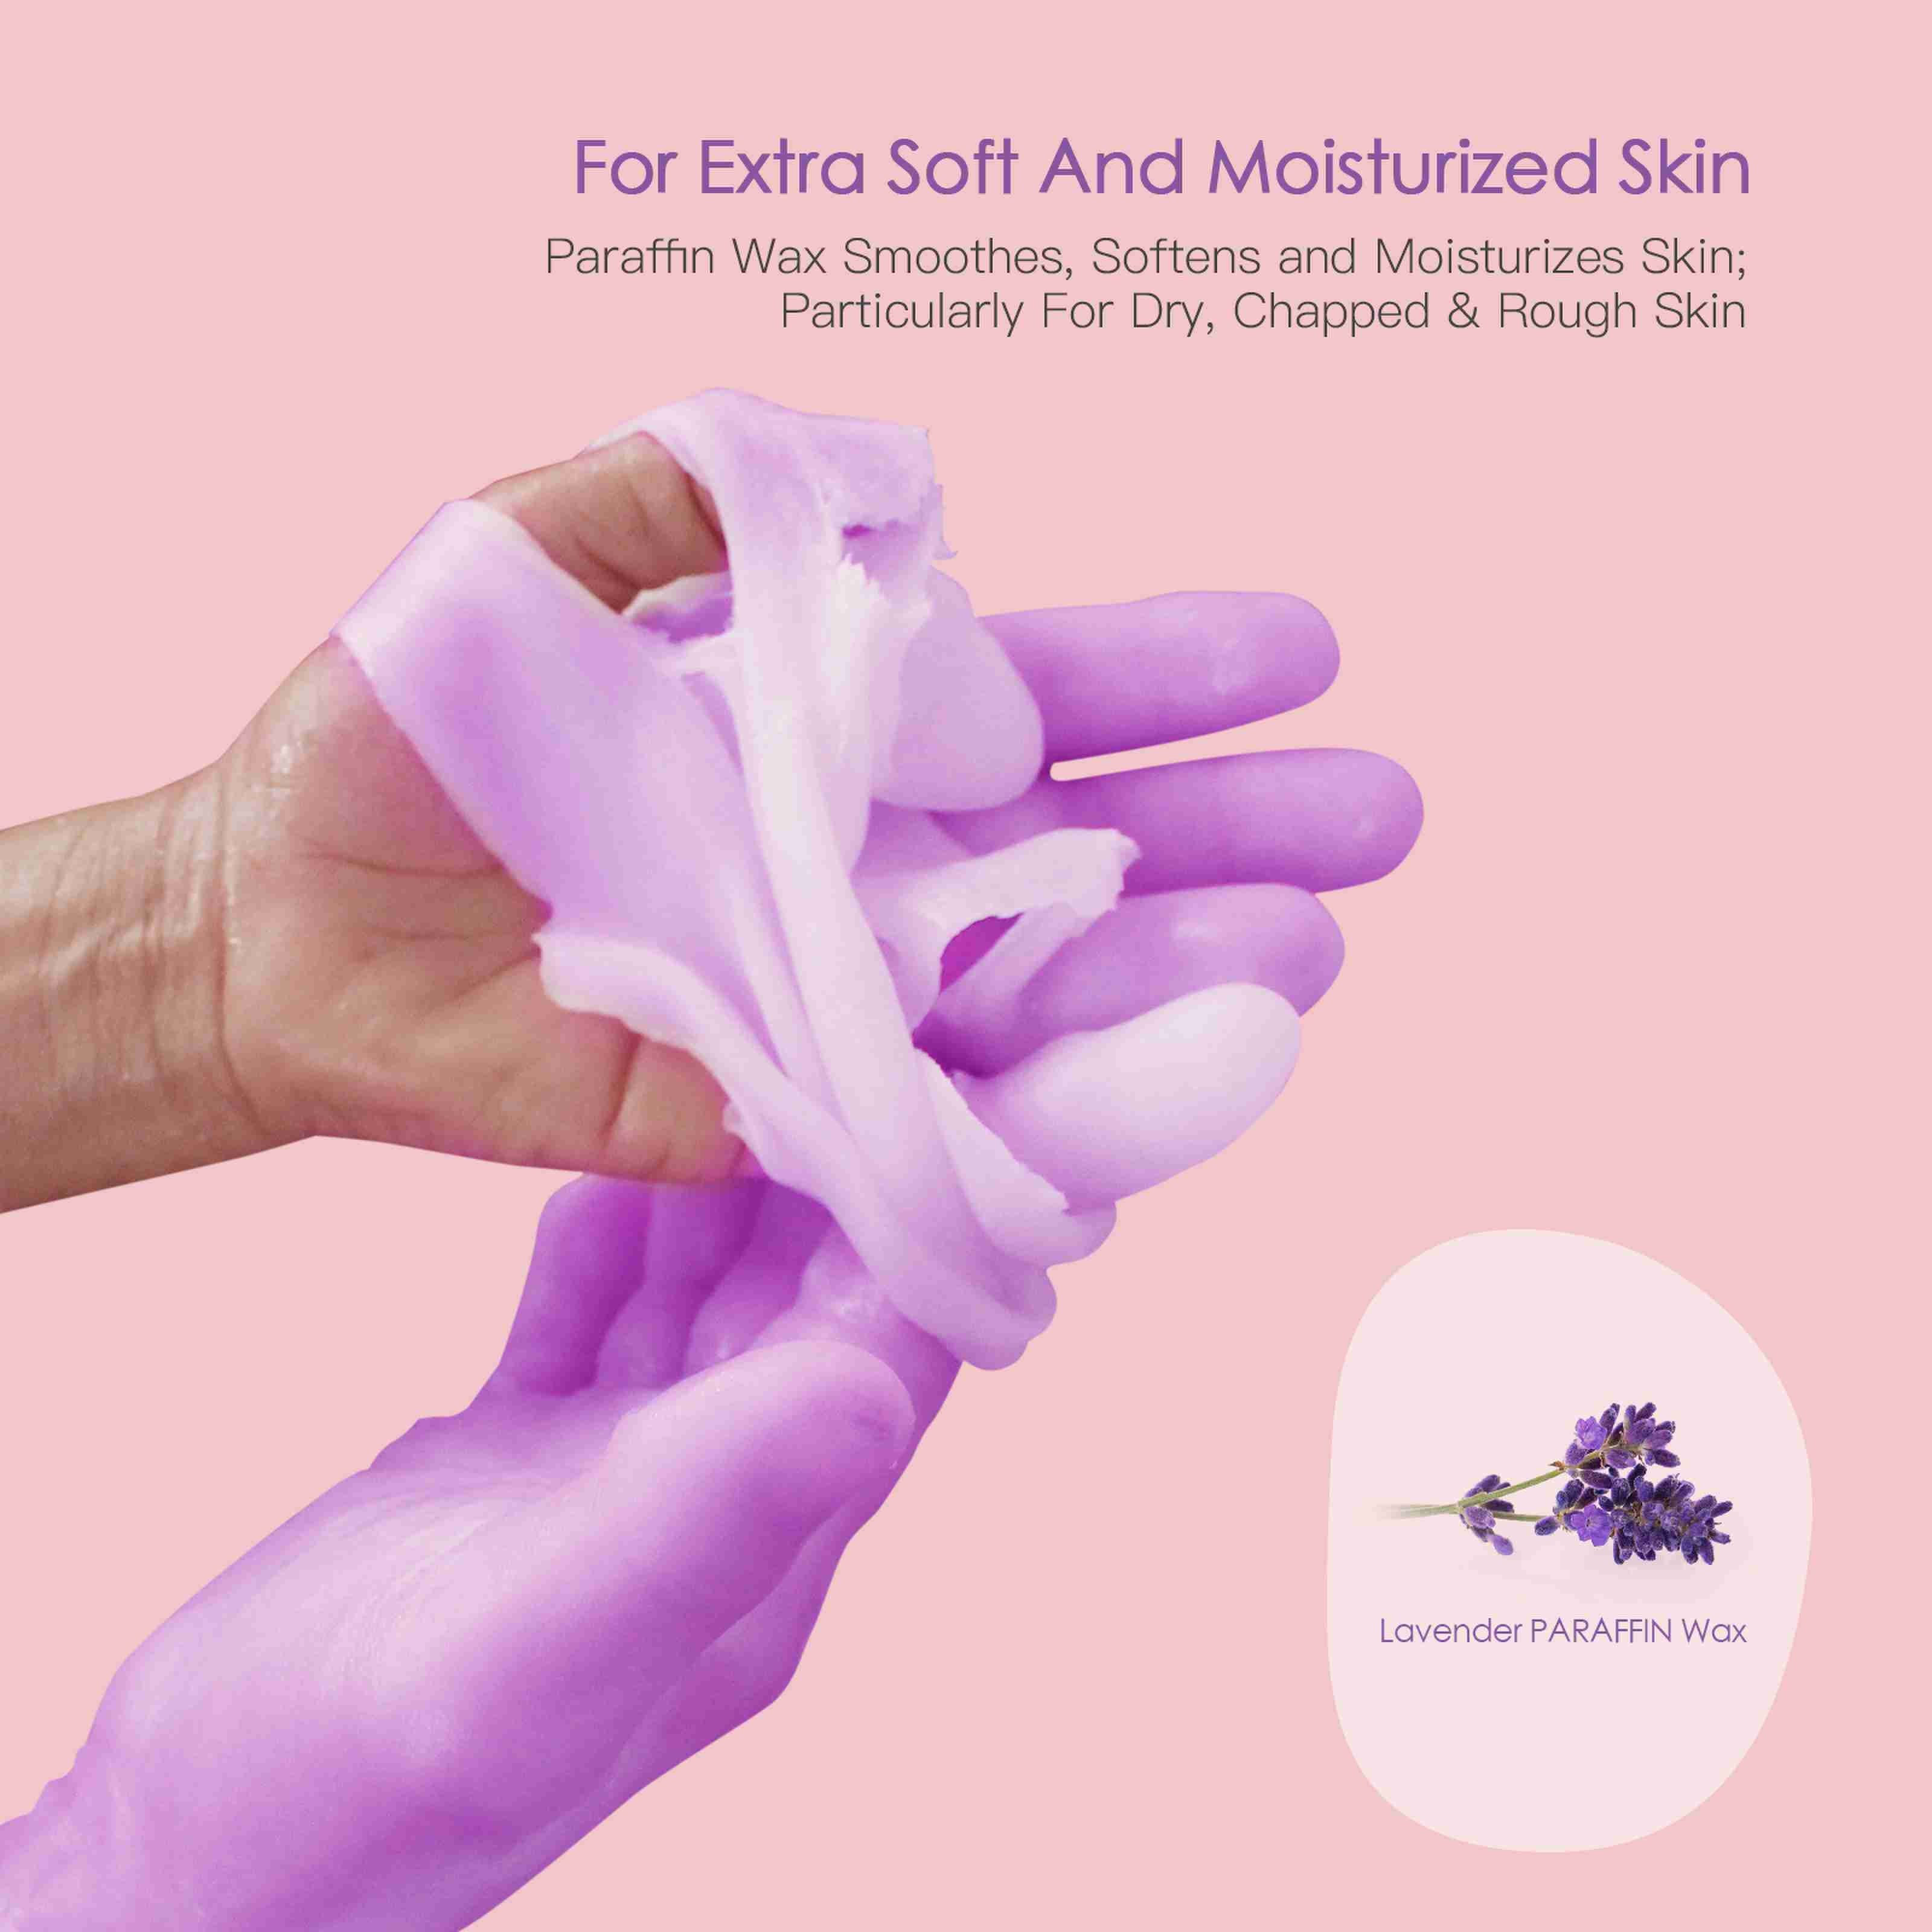 Cre8tion Paraffin Wax Refill 6 Lbs - Lavender – Daisy Nail Supply